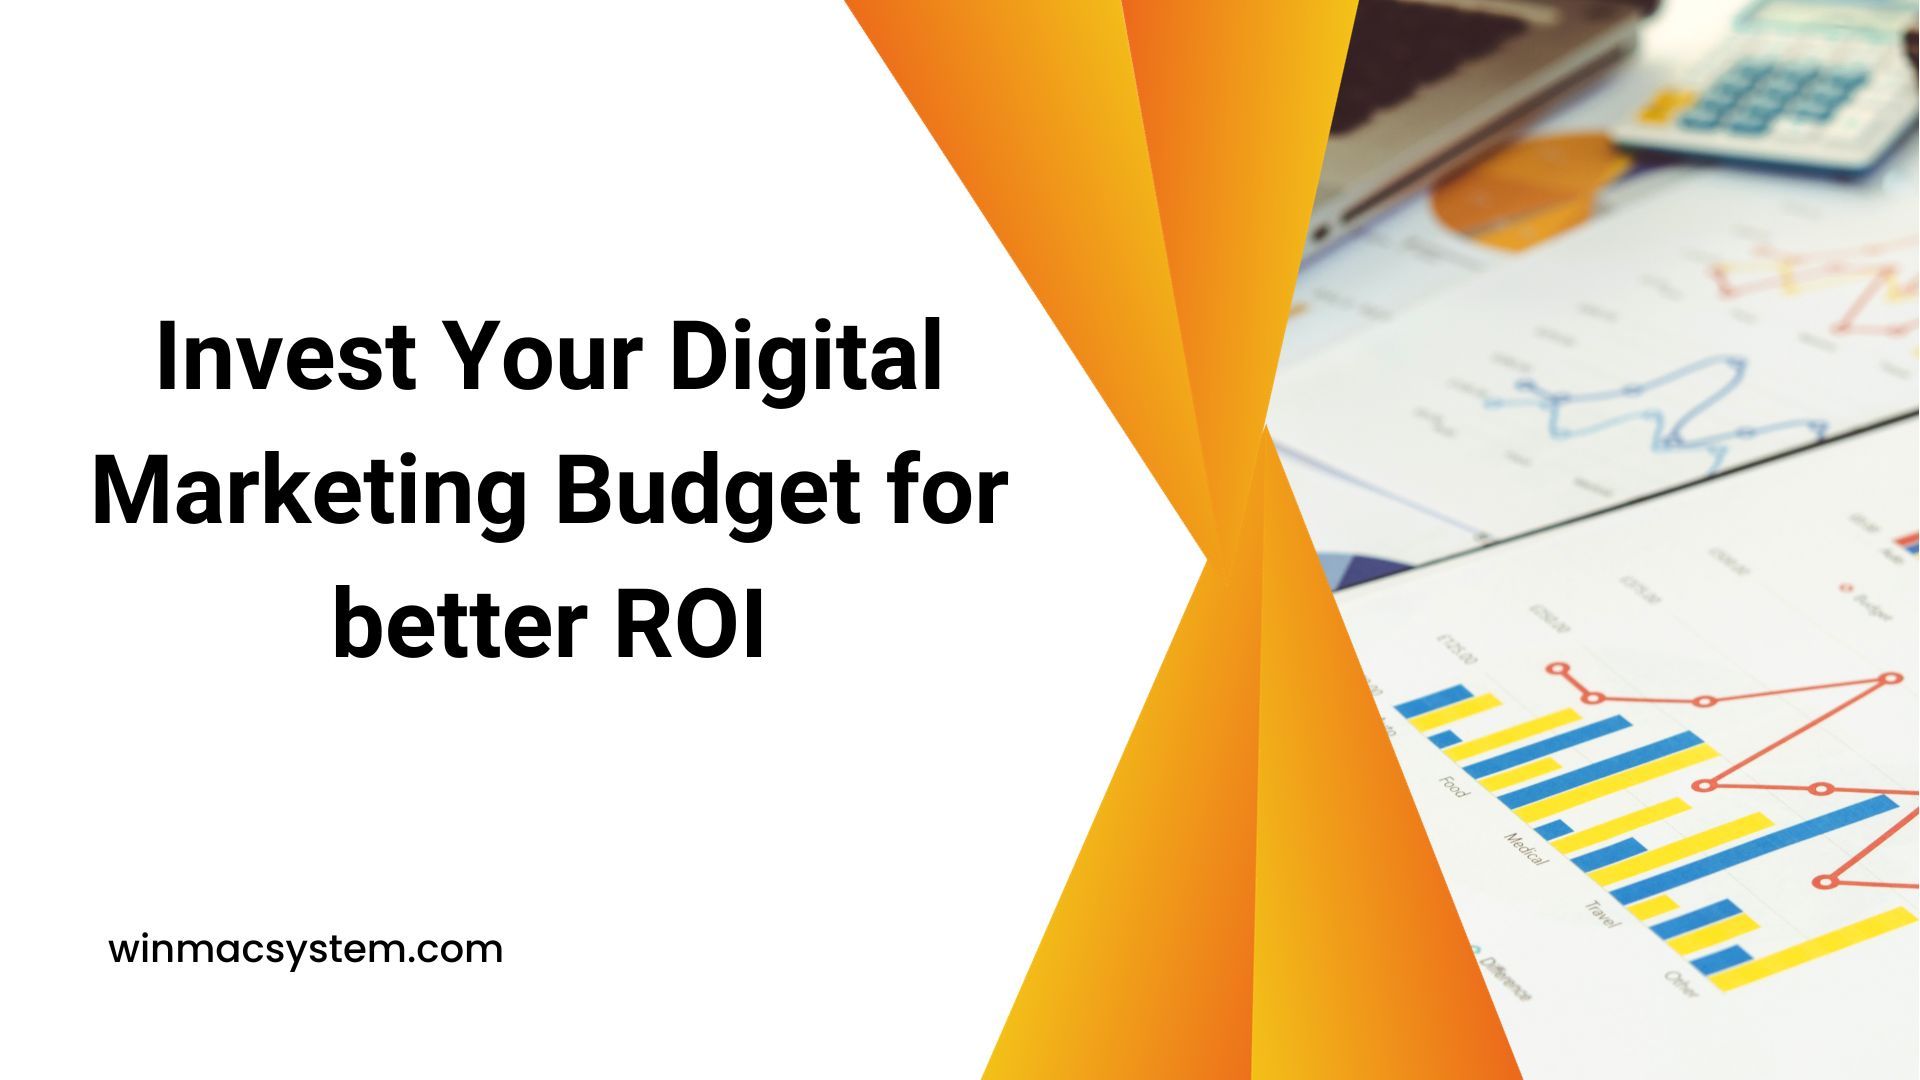 Invest Your Digital Marketing Budget for better ROI